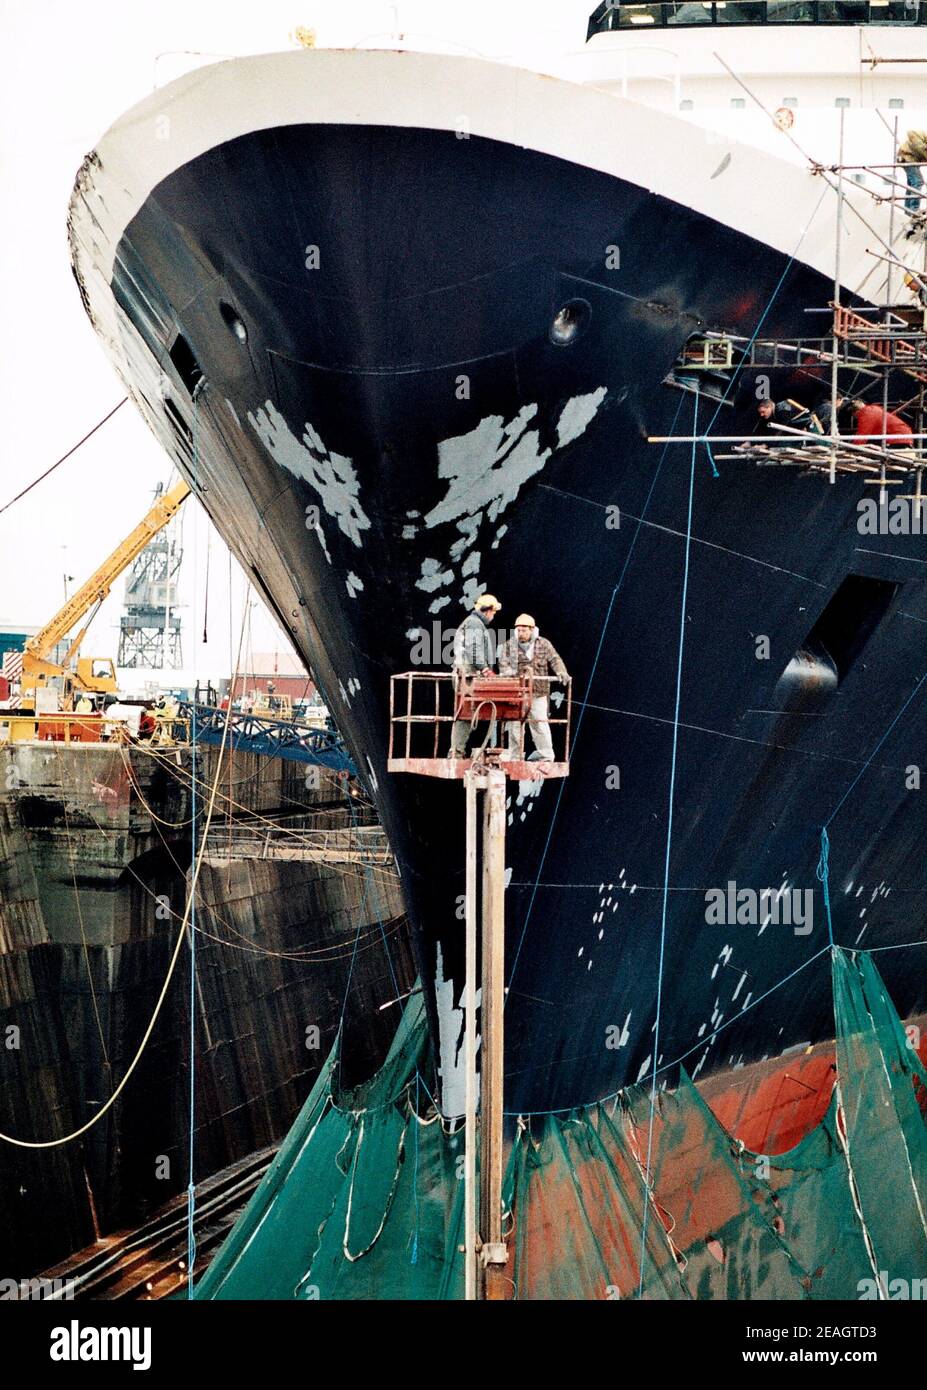 AJAXNETPHOTO. DEC 1996. SOUTHAMPTON, ENGLAND. -  BOW VIEW OF THE CUNARD PASSENGER LINER QUEEN ELIZABETH 2 - QE2 - IN KGV DRY DOCK, HER HULL SHROUDED IN NETTING, UNDERGOES REFIT.  PHOTO:JONATHAN EASTLAND/AJAX.  REF:TC6044 33 13 Stock Photo